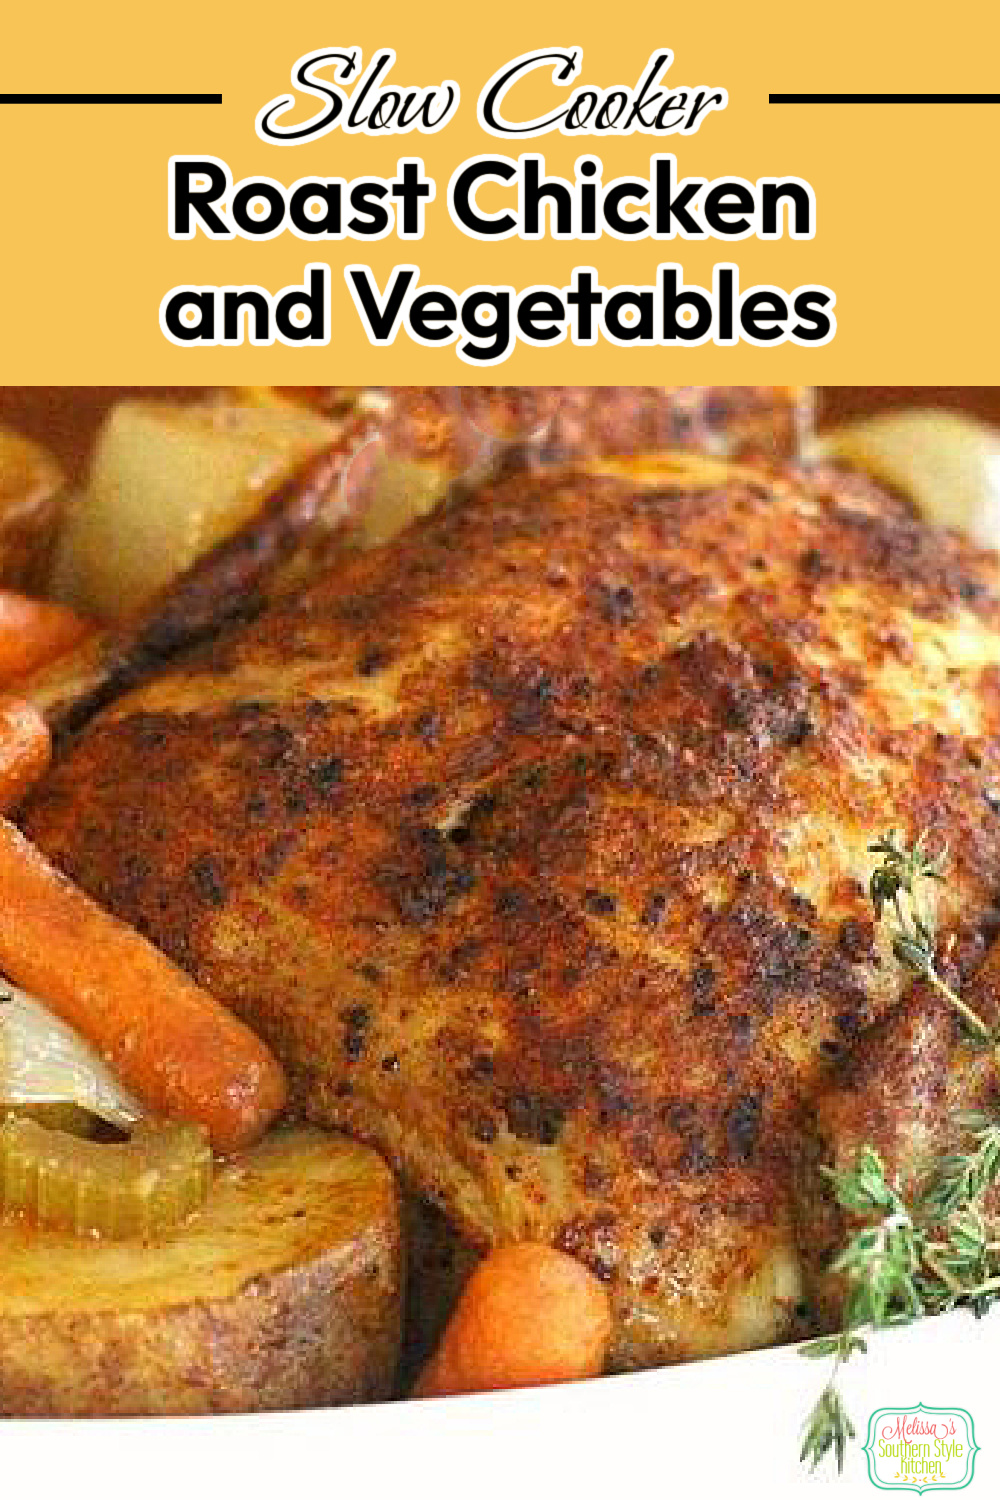 Make this delicious chicken dinner classic with ease using your slow cooker #roastchicken #slowcookerchicken #slowcookerroastchicken #easychickenrecipes #chicken #vegetables #slowcookerrecipes #crockpotchickenrecipes #dinner #dinnerideas #southernfood #southernrecipes